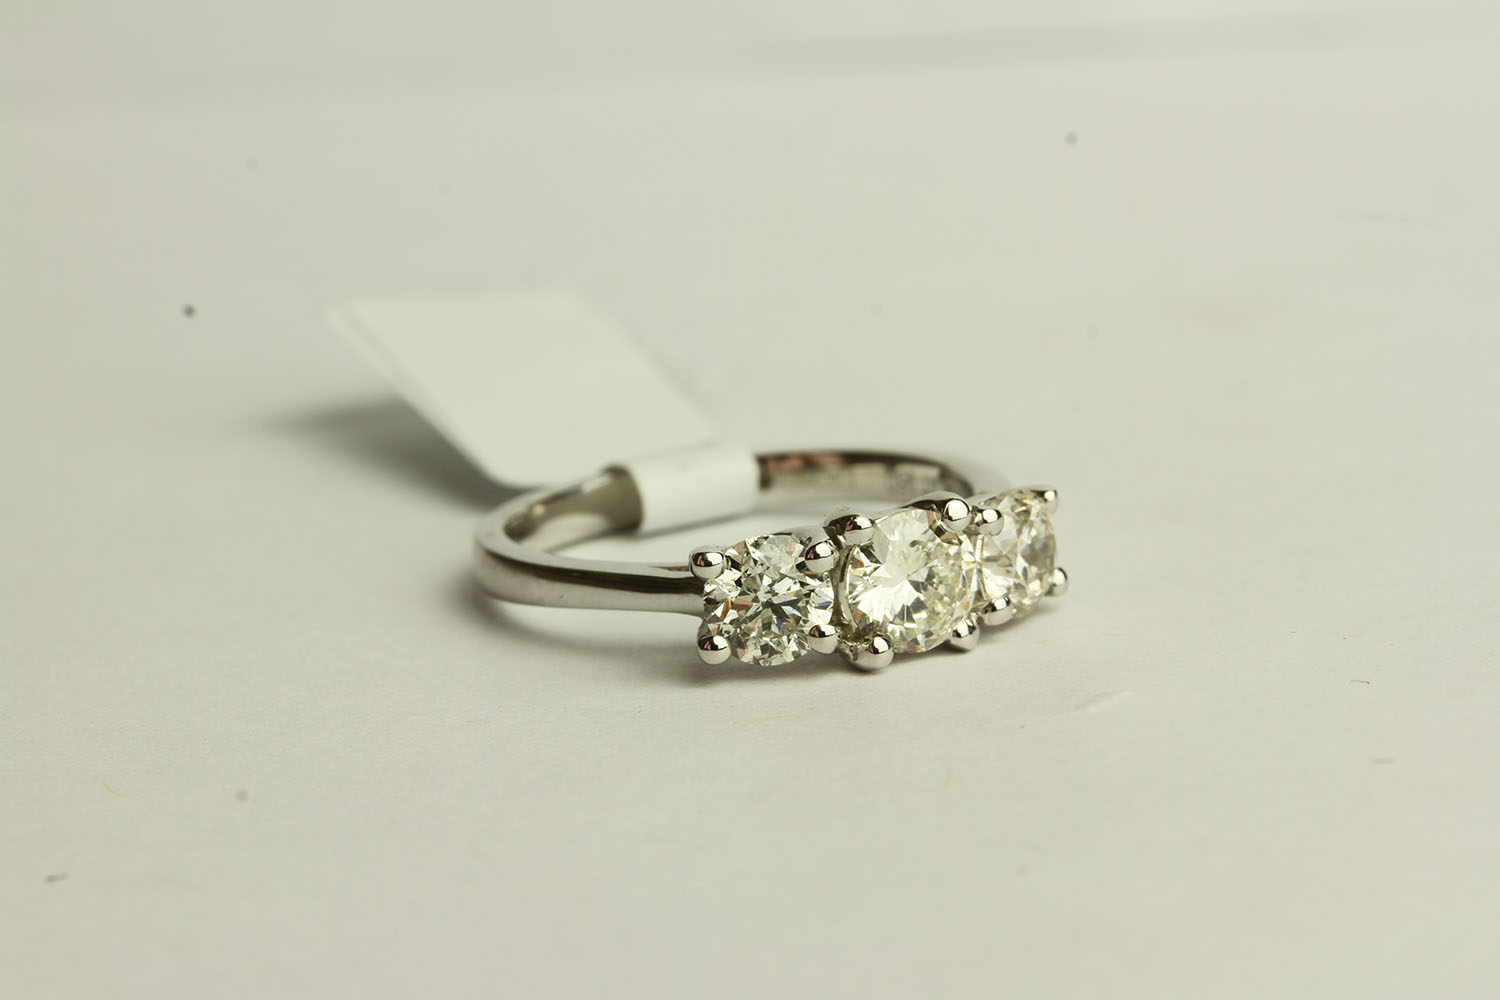 Diamond Trilogy Ring, set with 3 round brilliant cut diamonds totalling approximately 1.52ct - Image 2 of 3